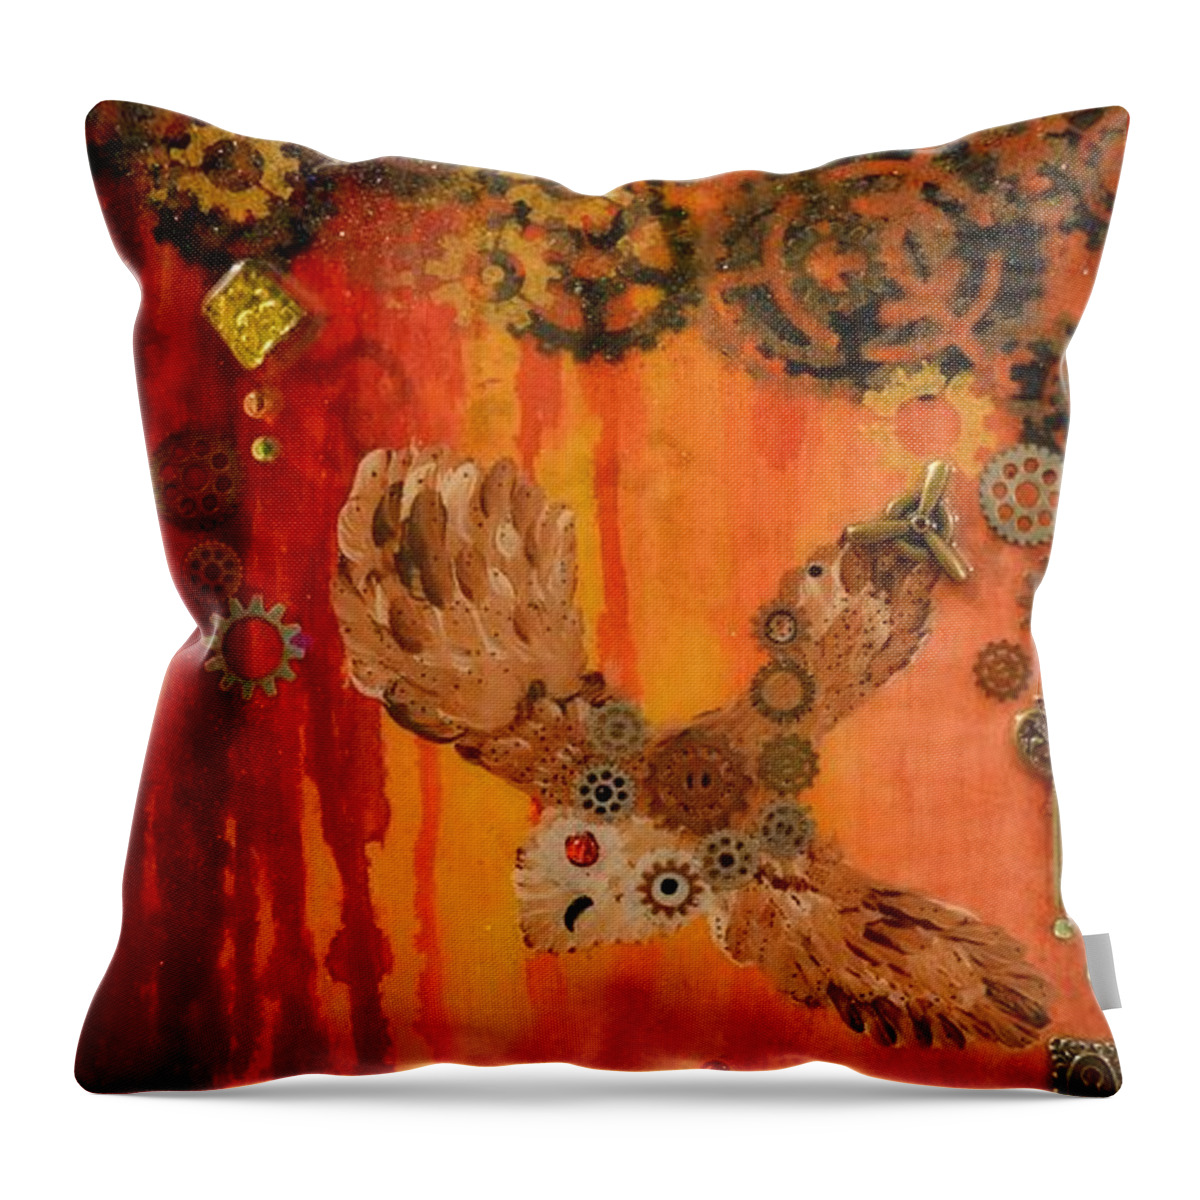 Iphone Cases Throw Pillow featuring the painting Steampunk Owl Red Horizon by MiMi Stirn